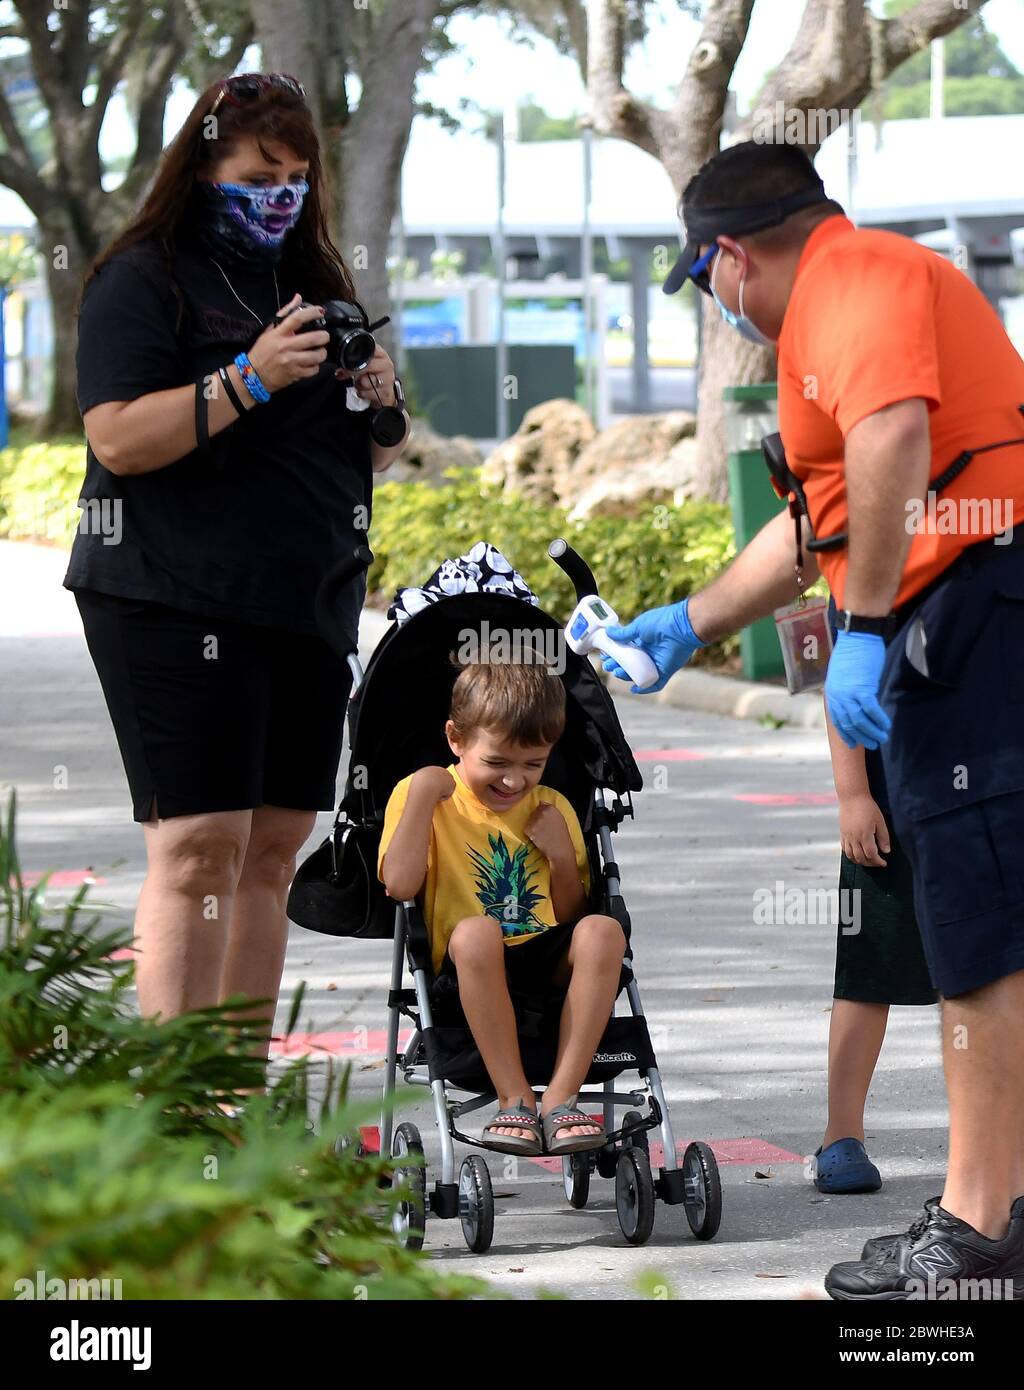 June 1, 2020 - Winter Haven, Florida, United States - A child in a stroller reacts as his temperature is checked at the entrance to LEGOLAND Florida on the day the theme park reopened to the public after closing in mid-March due to the coronavirus pandemic. Guests are now required to submit to temperature checks and the wearing of face coverings is recommended but not required. (Paul Hennessy/Alamy Live News) Stock Photo